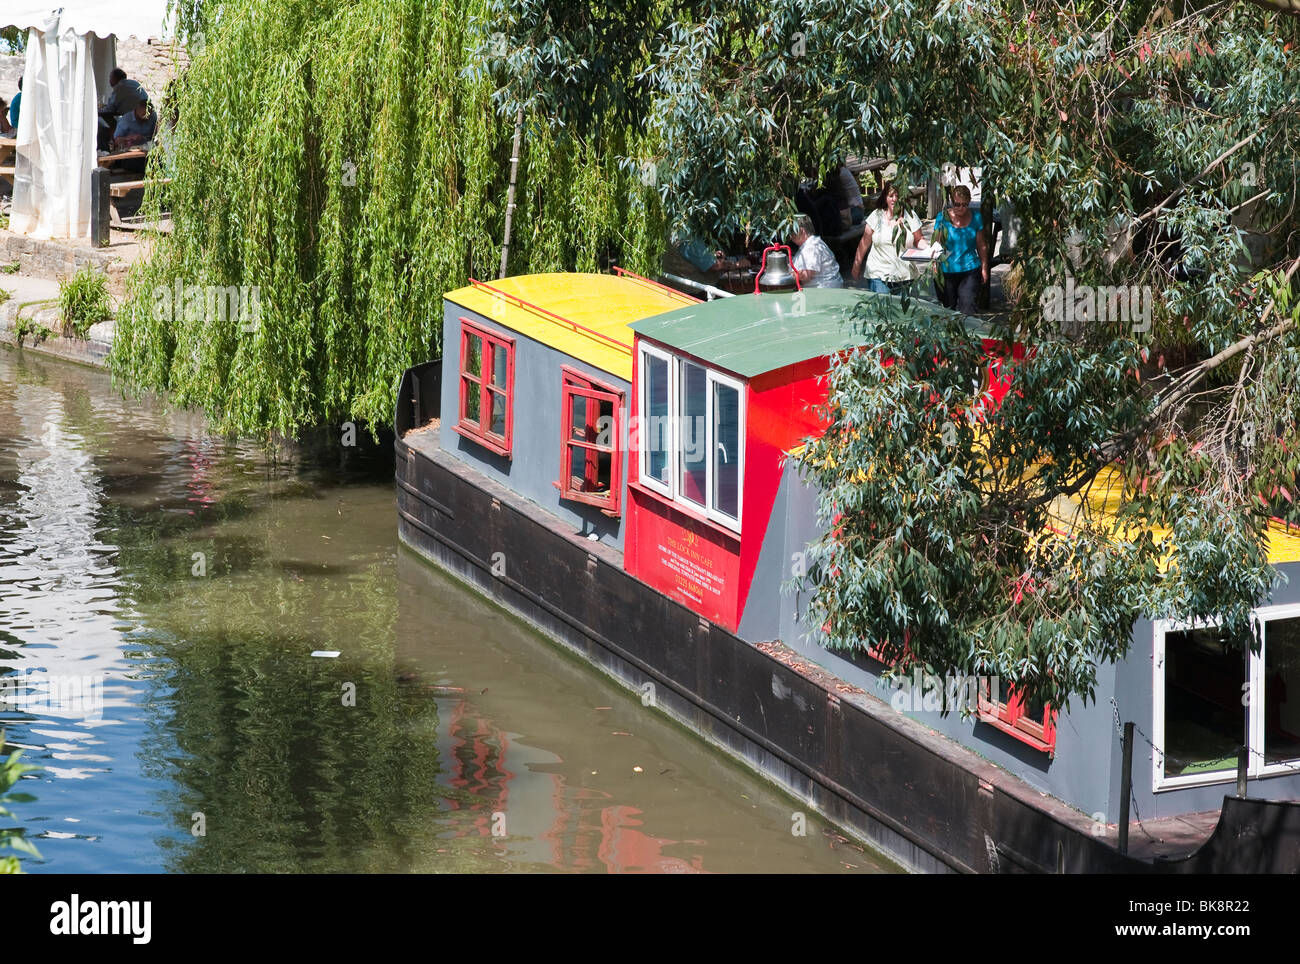 Canal boat converted to tea room moored alongside 'The Lock Inn' Cafe in 'Bradford on Avon' Wiltshire England UK EU Stock Photo